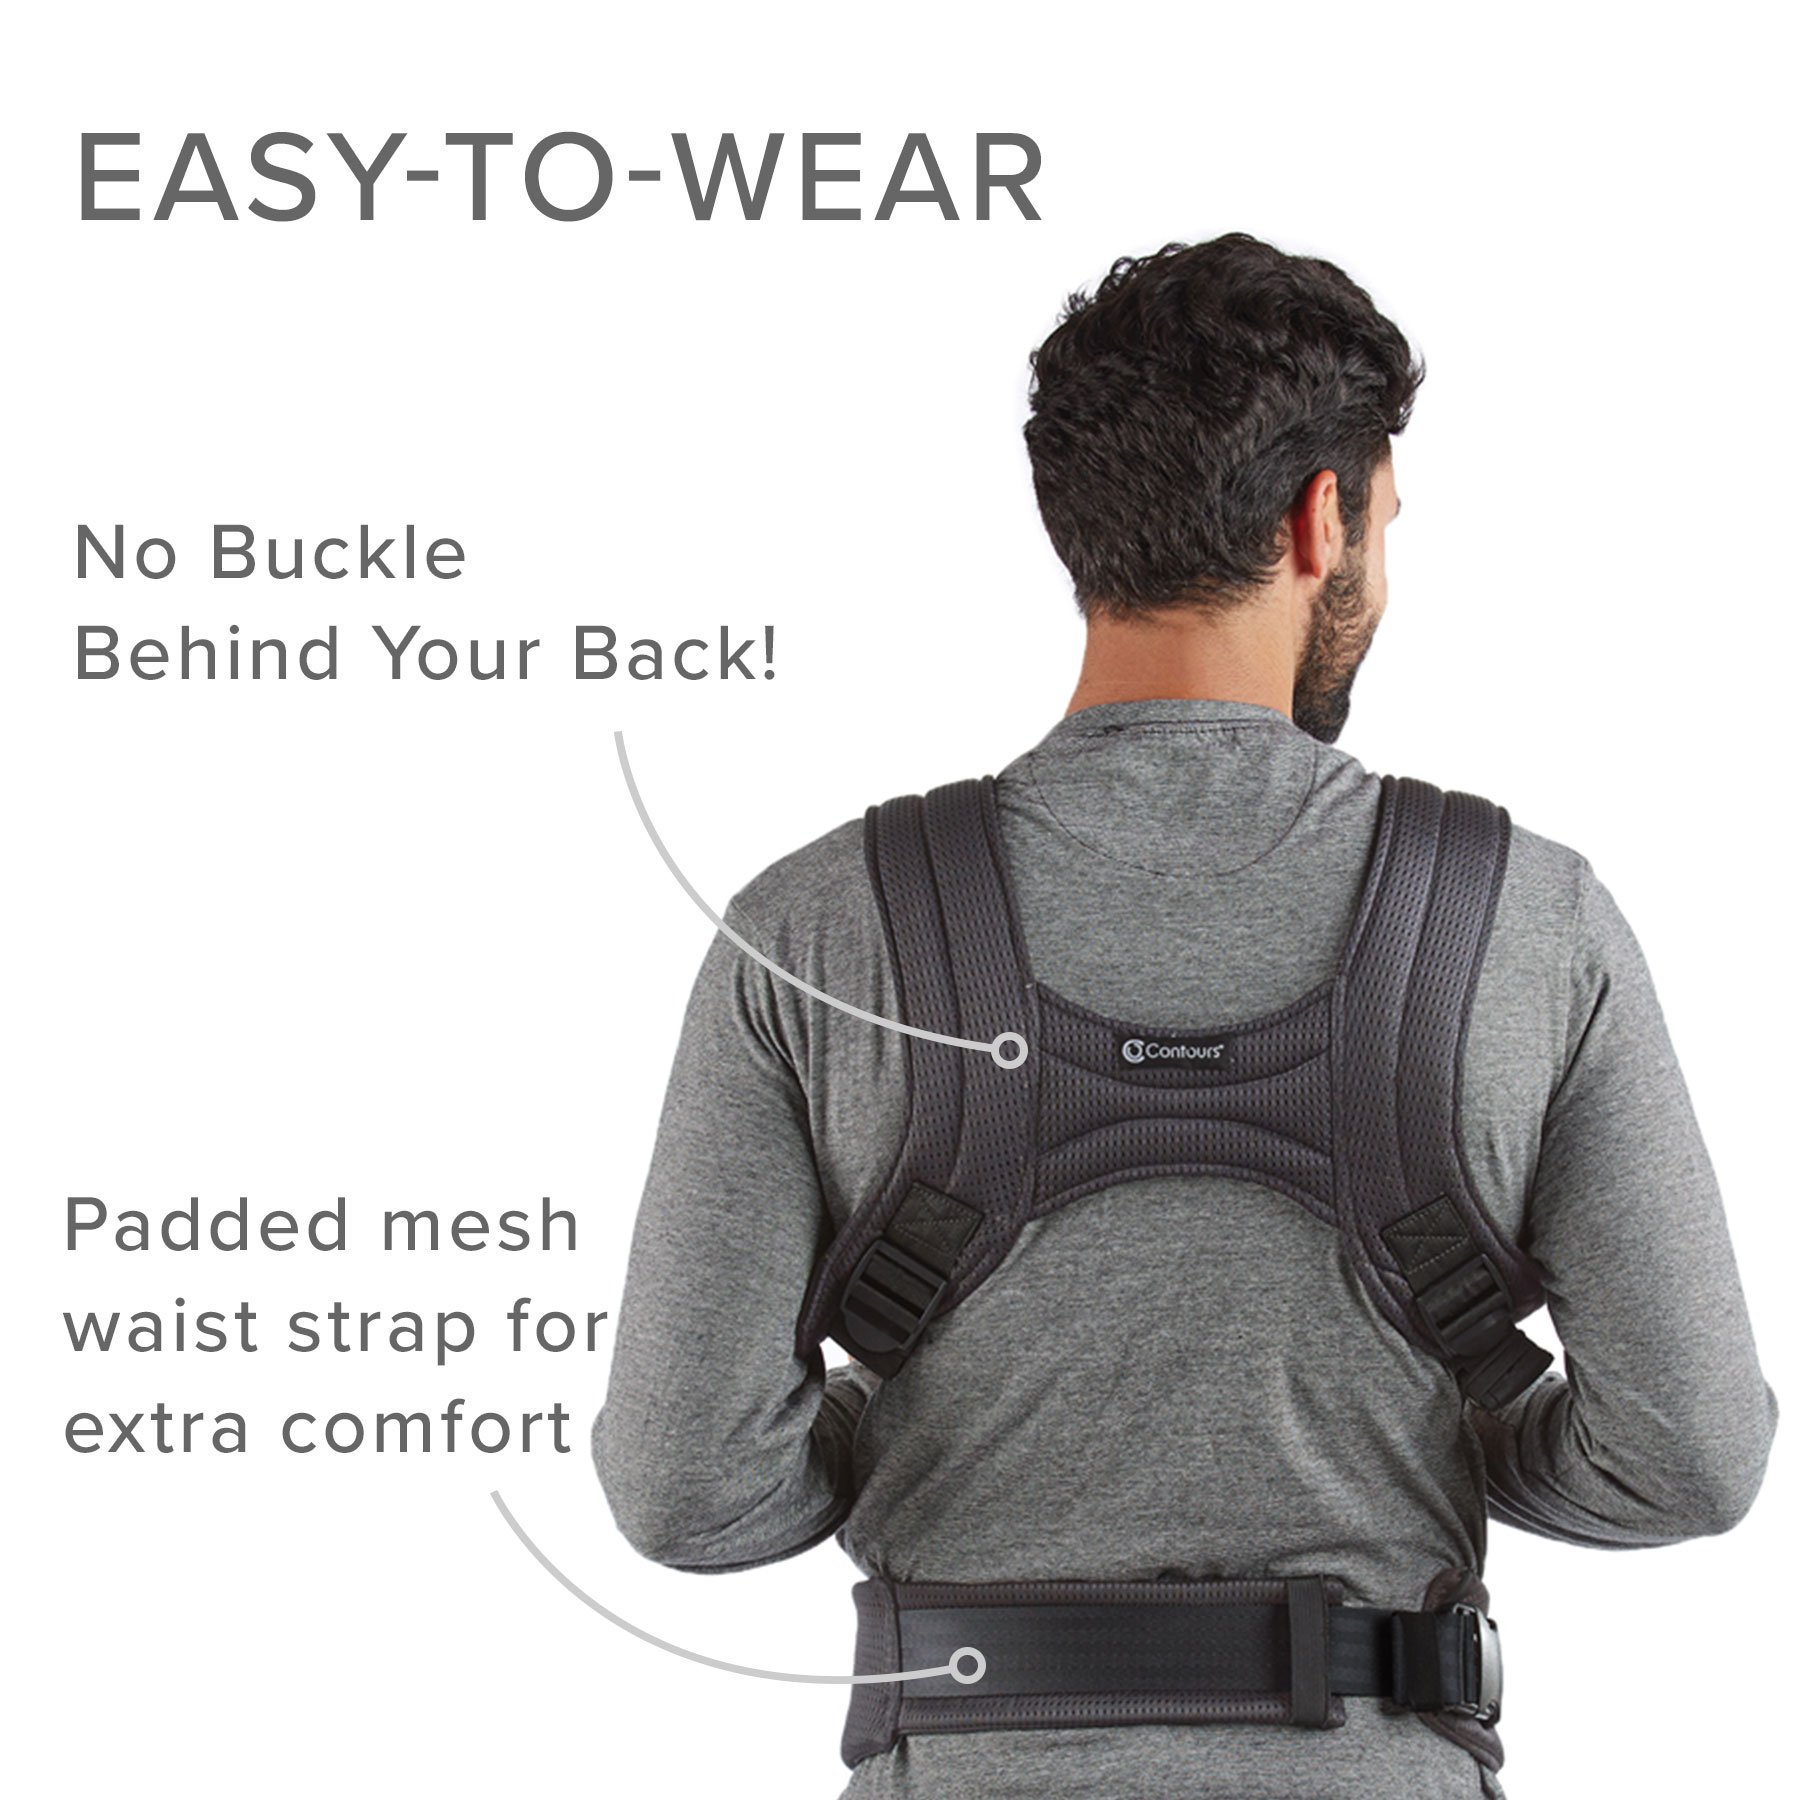 Contours Baby Carrier Newborn to Toddler |Love 3 Position Convertible Easy-to-Use Baby Carrier with Pockets for Men and Women, Newborn, Front Face in and Front Face Out (8-30lbs) - Charcoal Gray